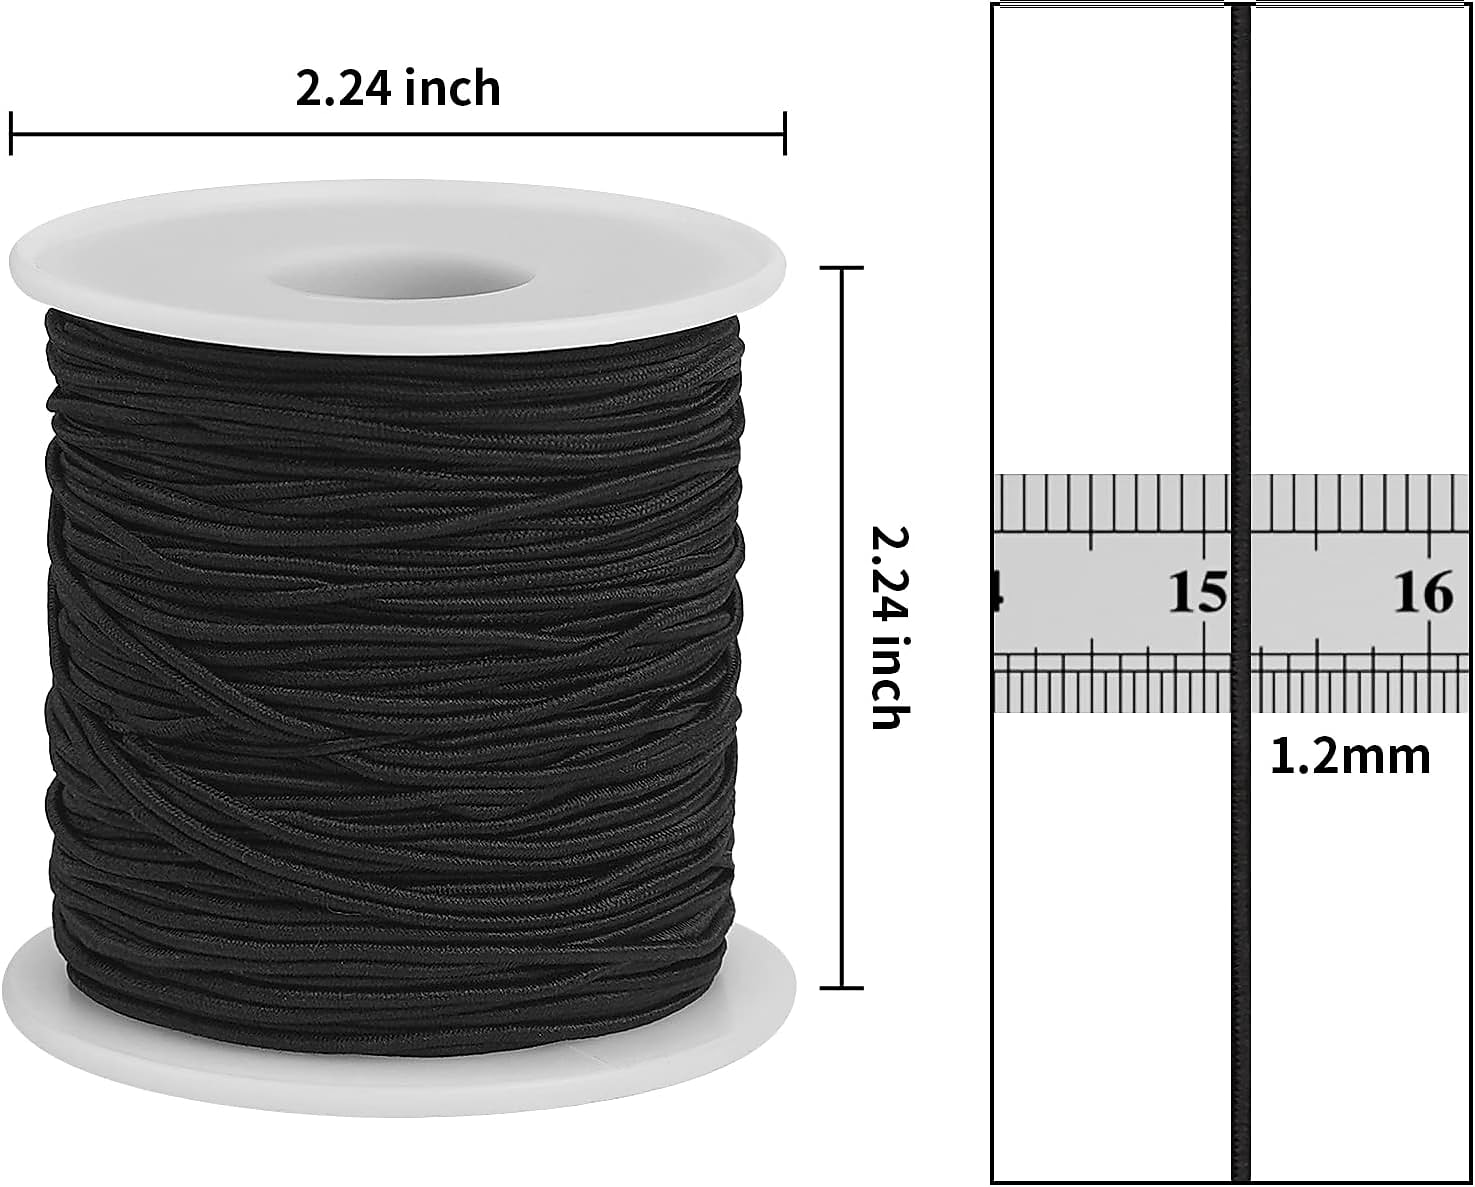 Elastic String for Bracelets, 4 Rolls 1 mm Sturdy Stretchy Elastic Cord for  Making Jewelry, Necklaces, Beading (2 Black+ 2 White)